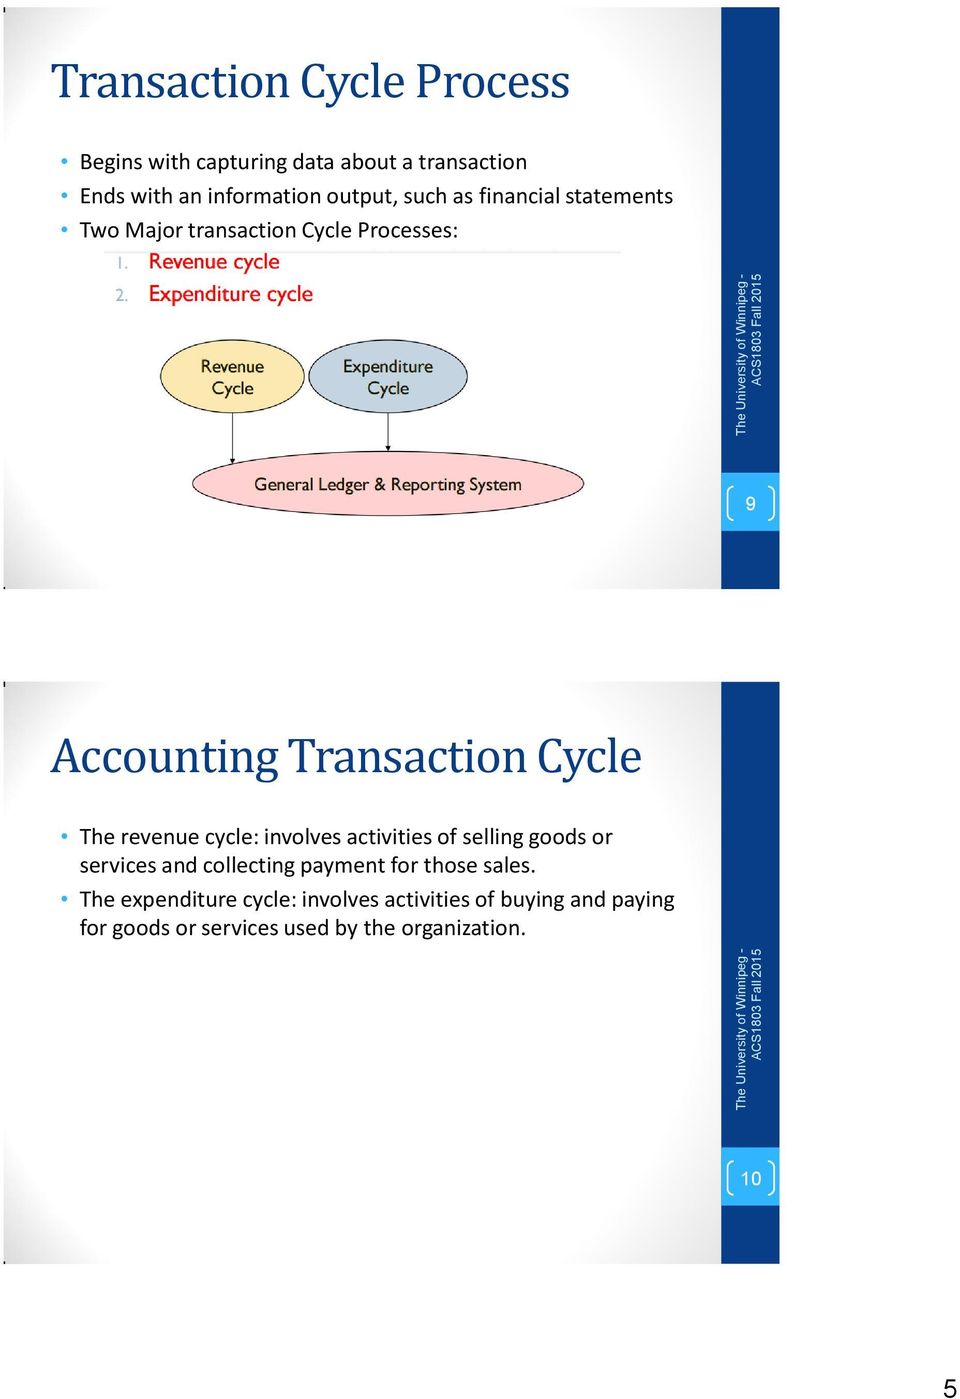 revenue cycle: involves activities of selling goods or services and collecting payment for those sales.